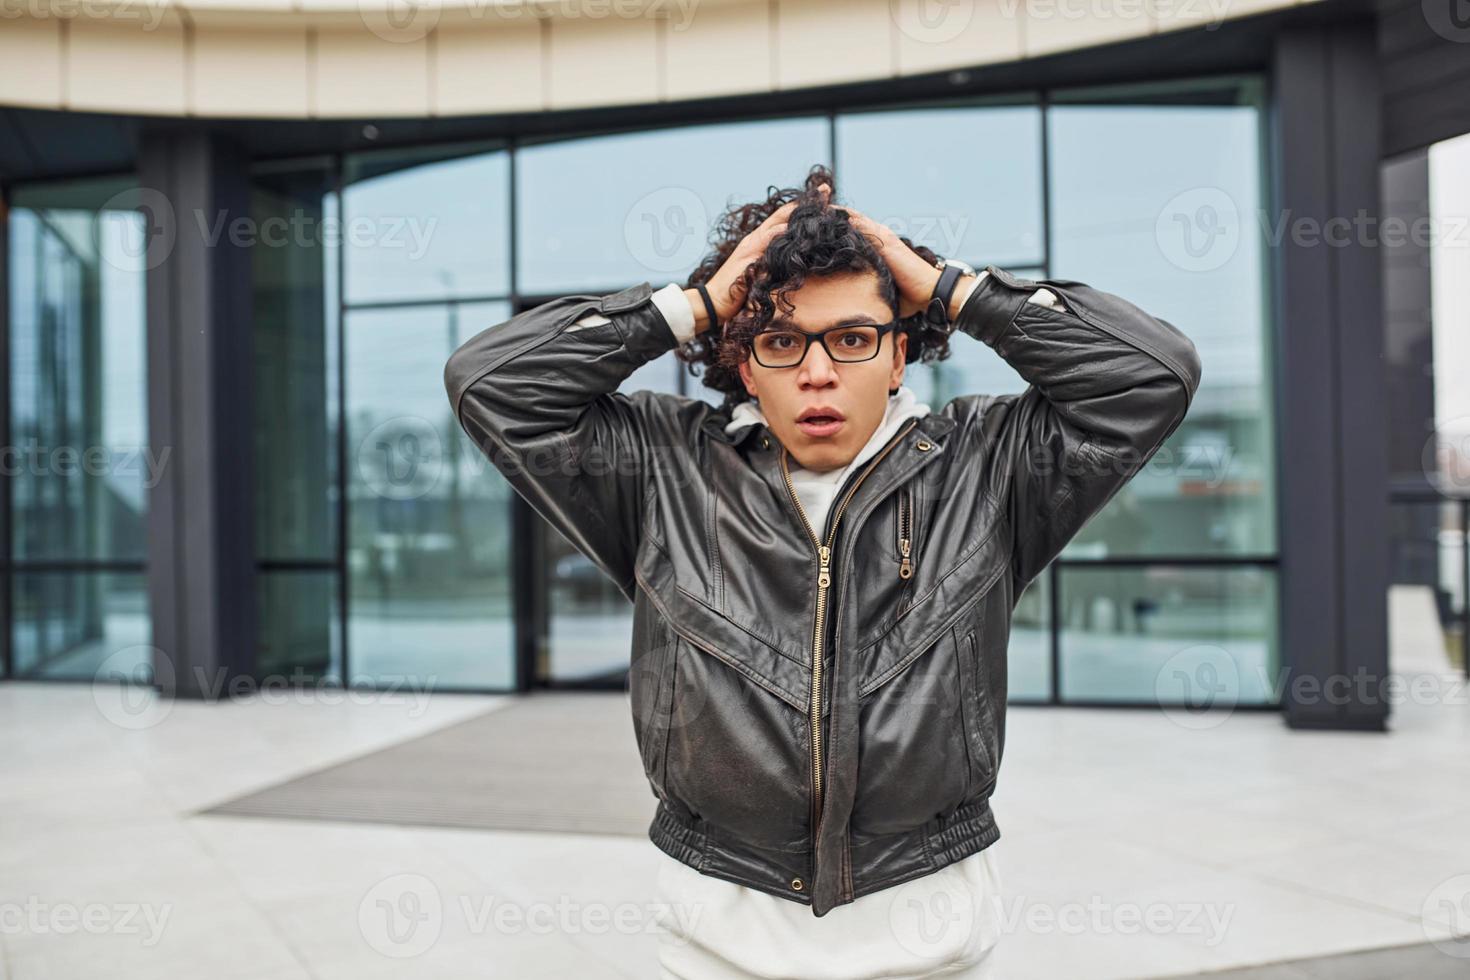 Handsome young man with curly black hair standing and feels shoked on the street against building photo